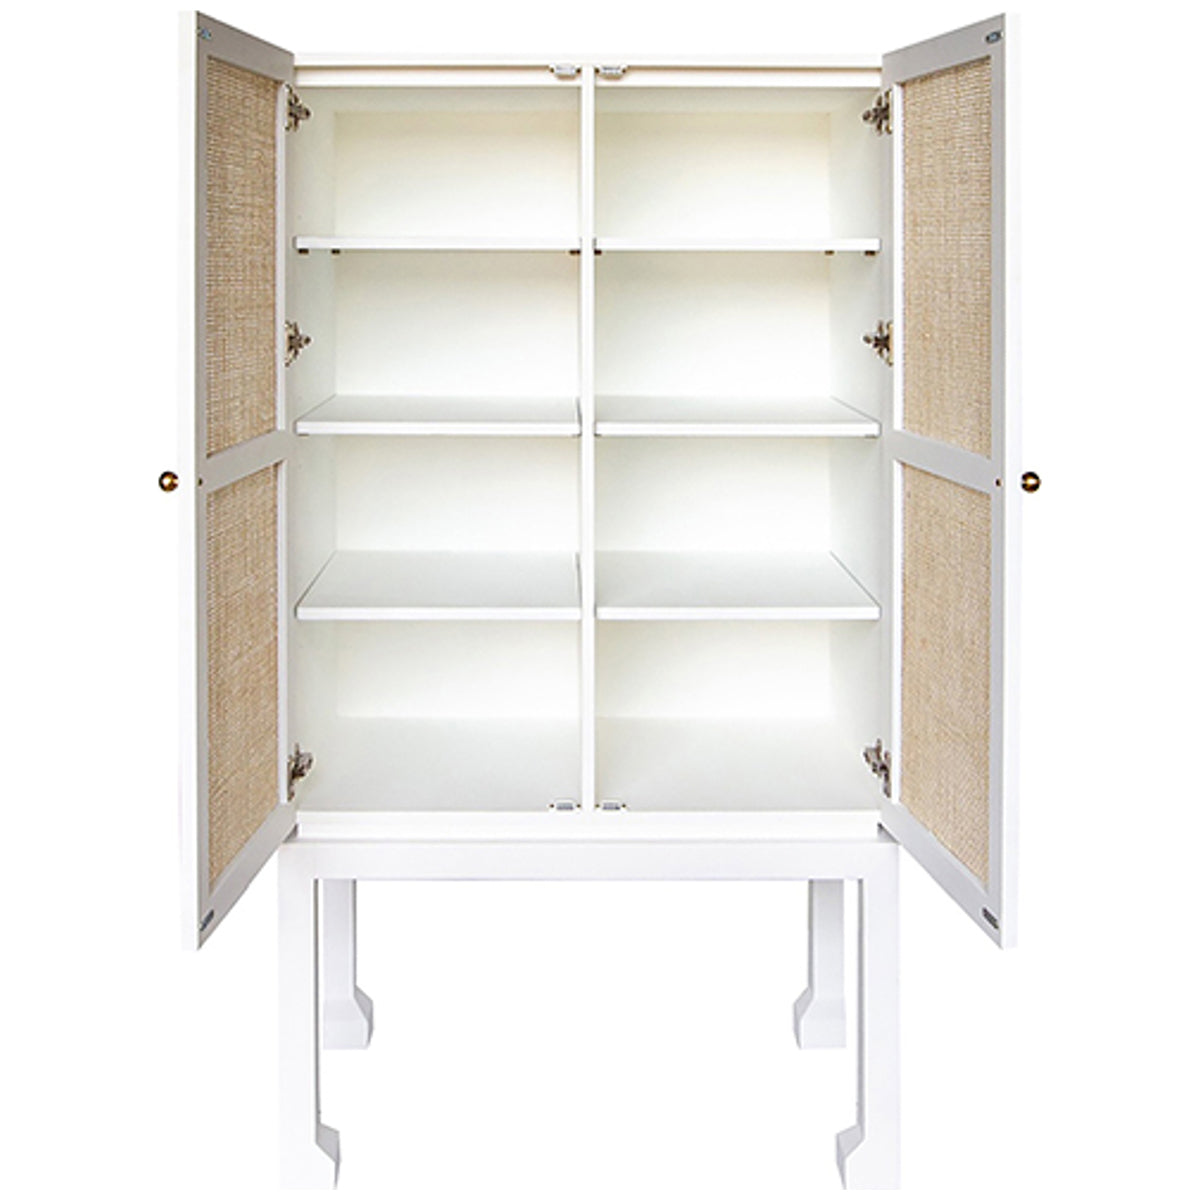 Worlds Away Bar Cabinet in Matte White with Natural Cane Doors